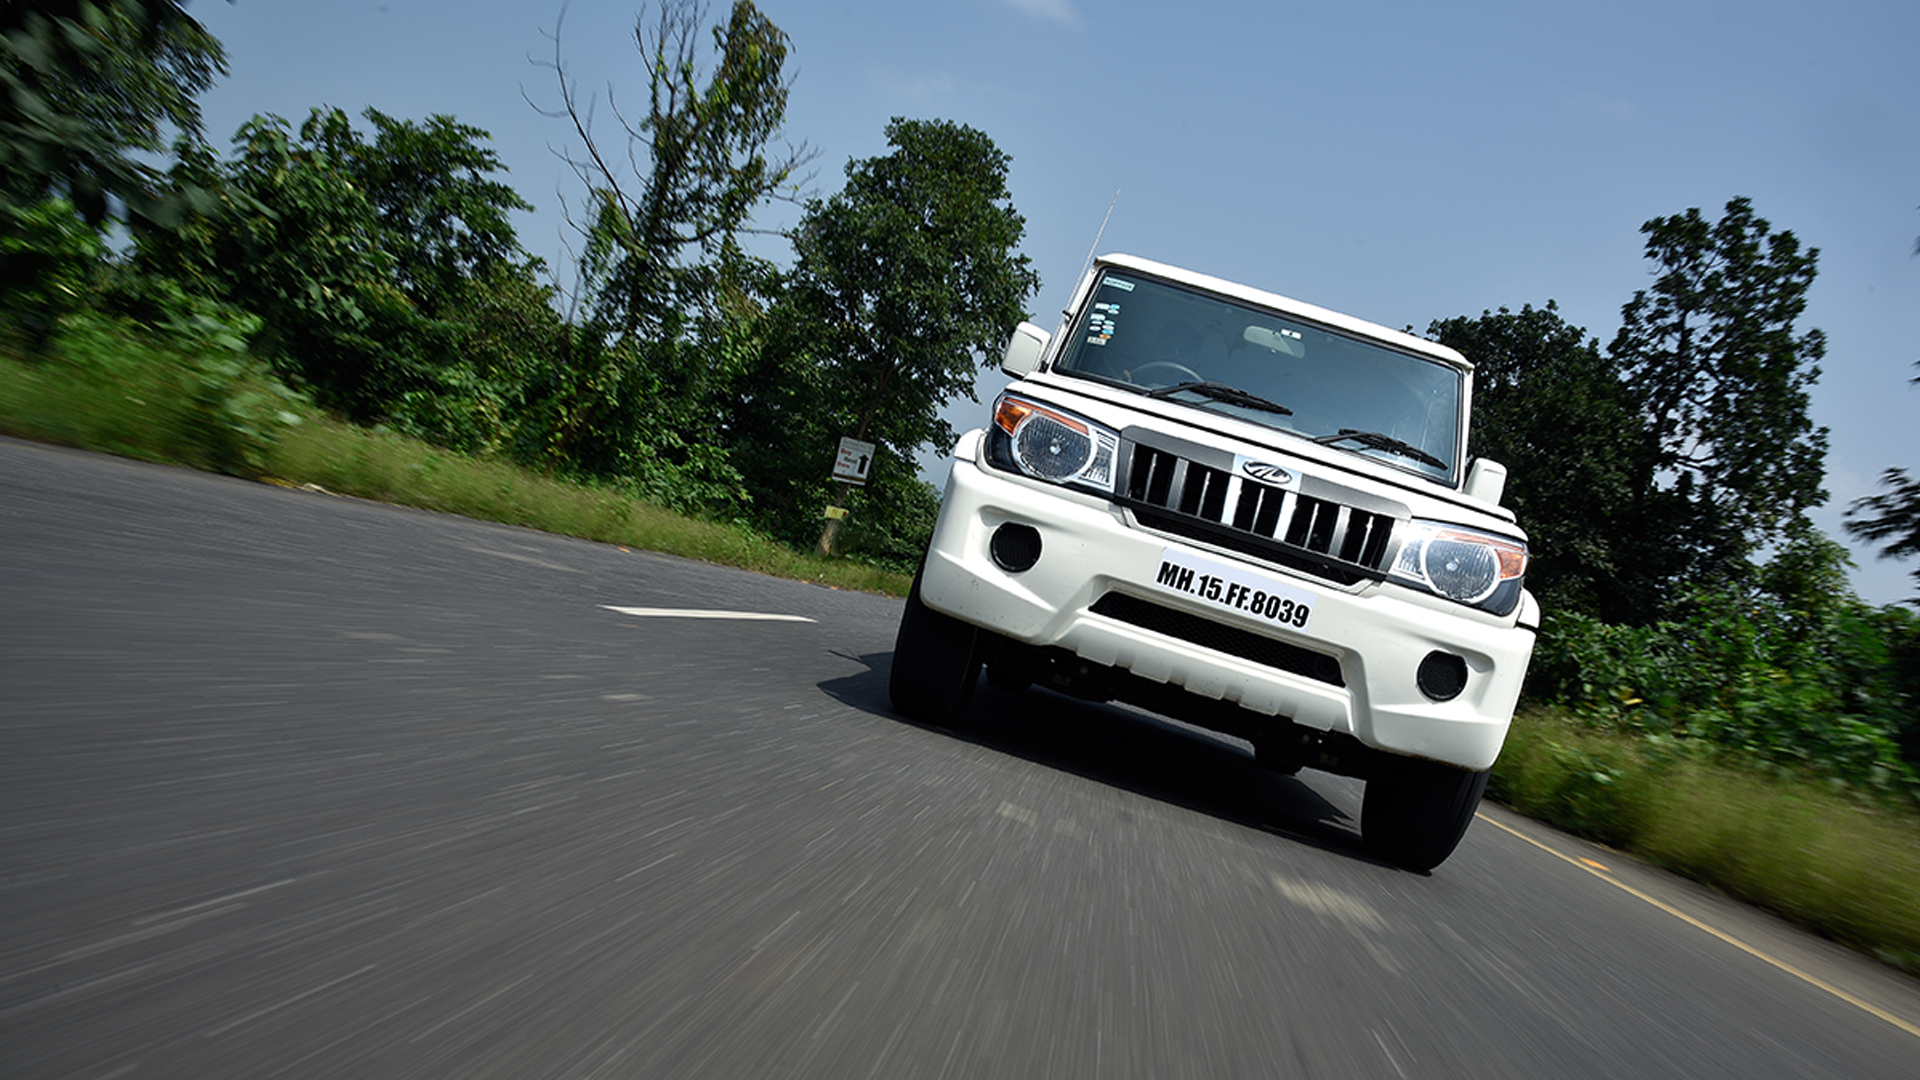 Mahindra Bolero 2020 - Price in India, Mileage, Reviews, Colours,  Specification, Images - Overdrive